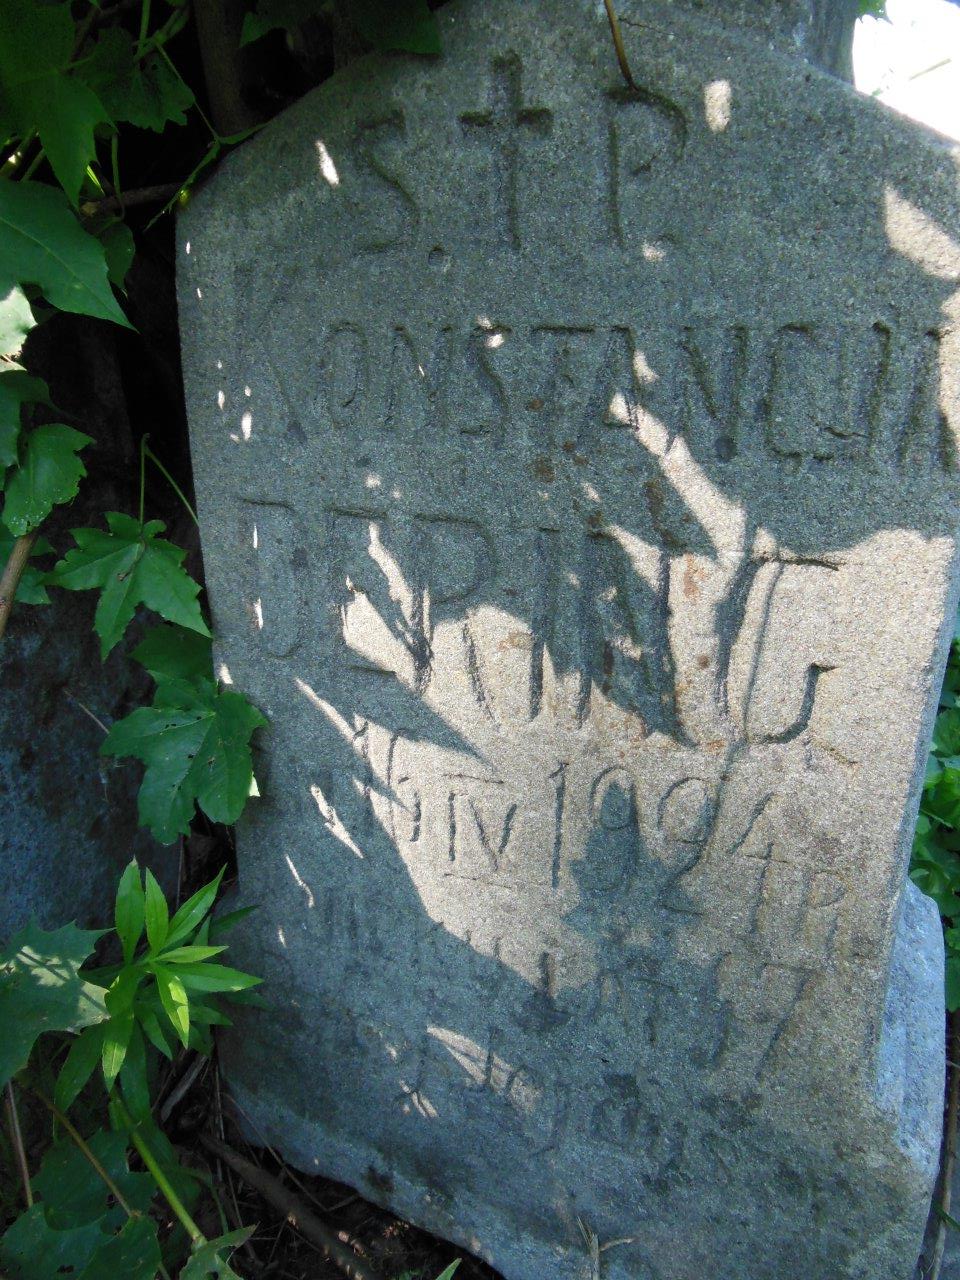 Fragment of the tombstone of Constance Dering from the Ross Cemetery in Vilnius, as of 2013.